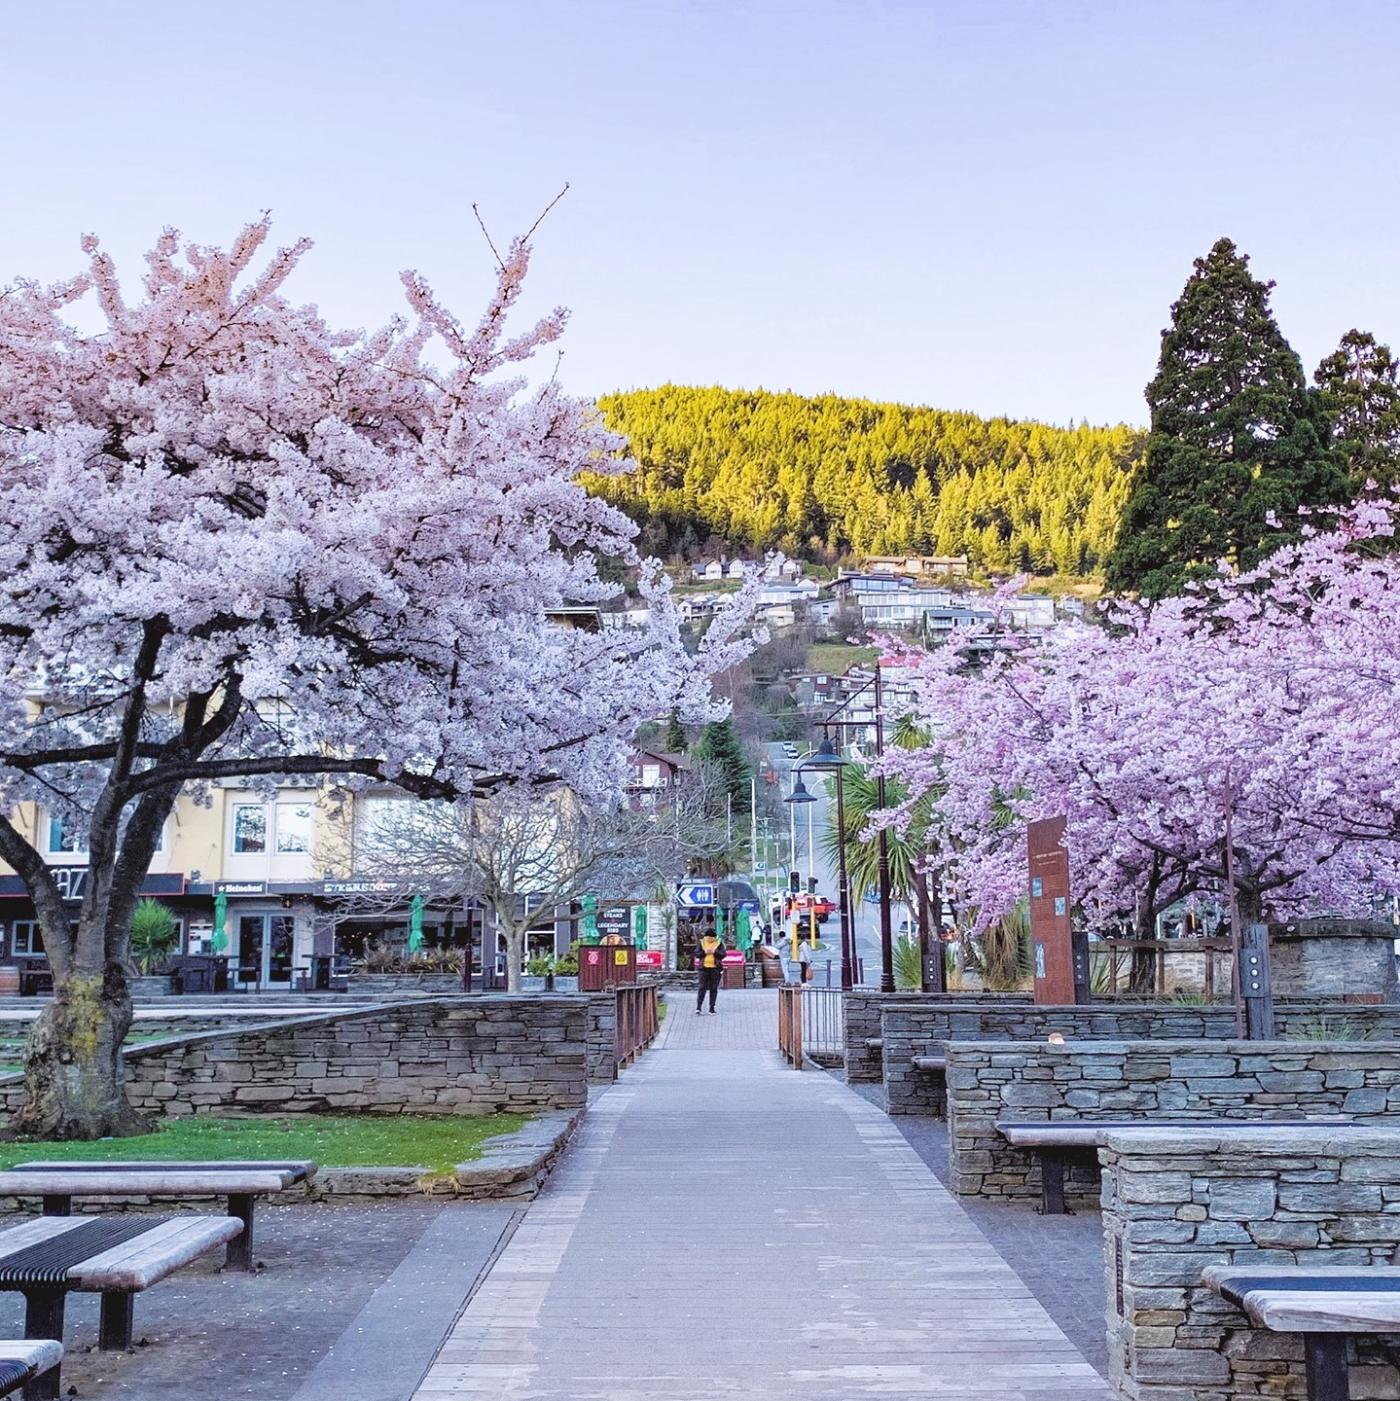 Village Green in spring with pink cherry blossoms. Credit @airnapier on Instagram